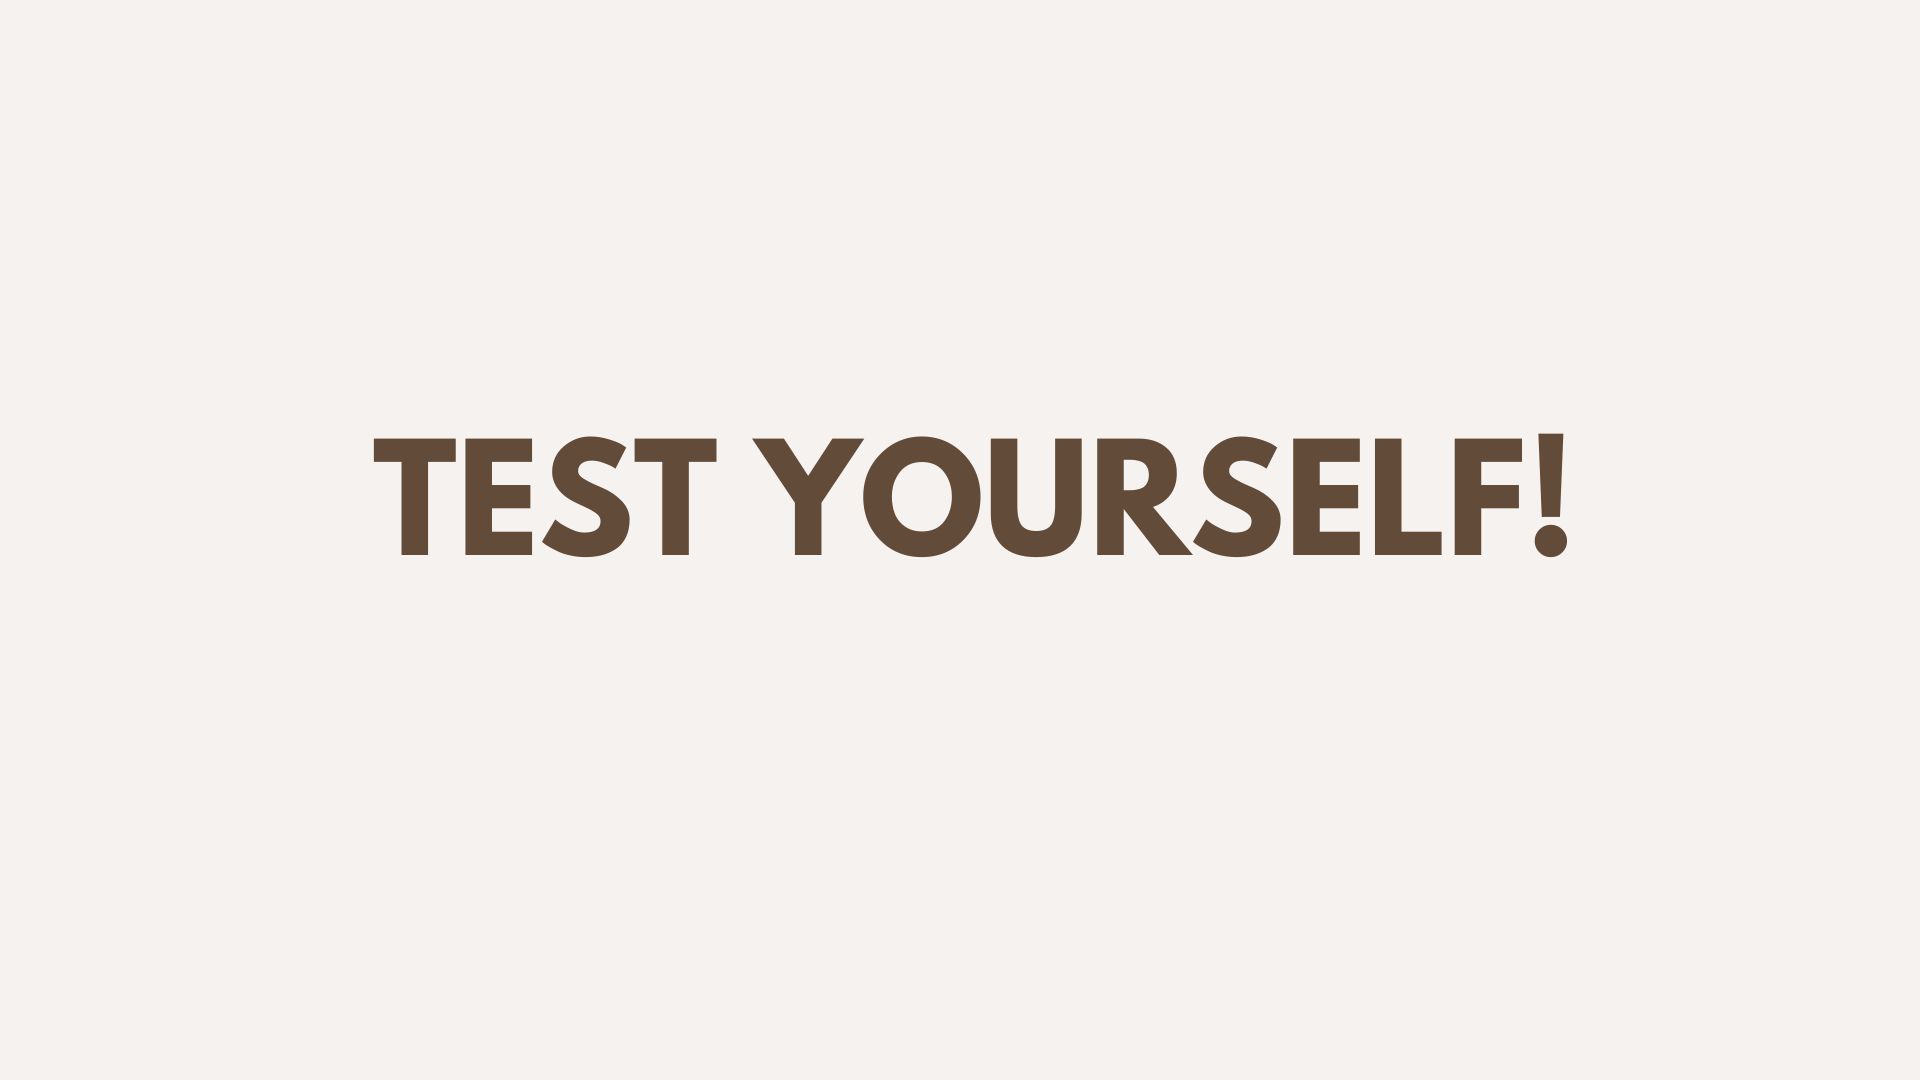 Test yourself! Course - 2